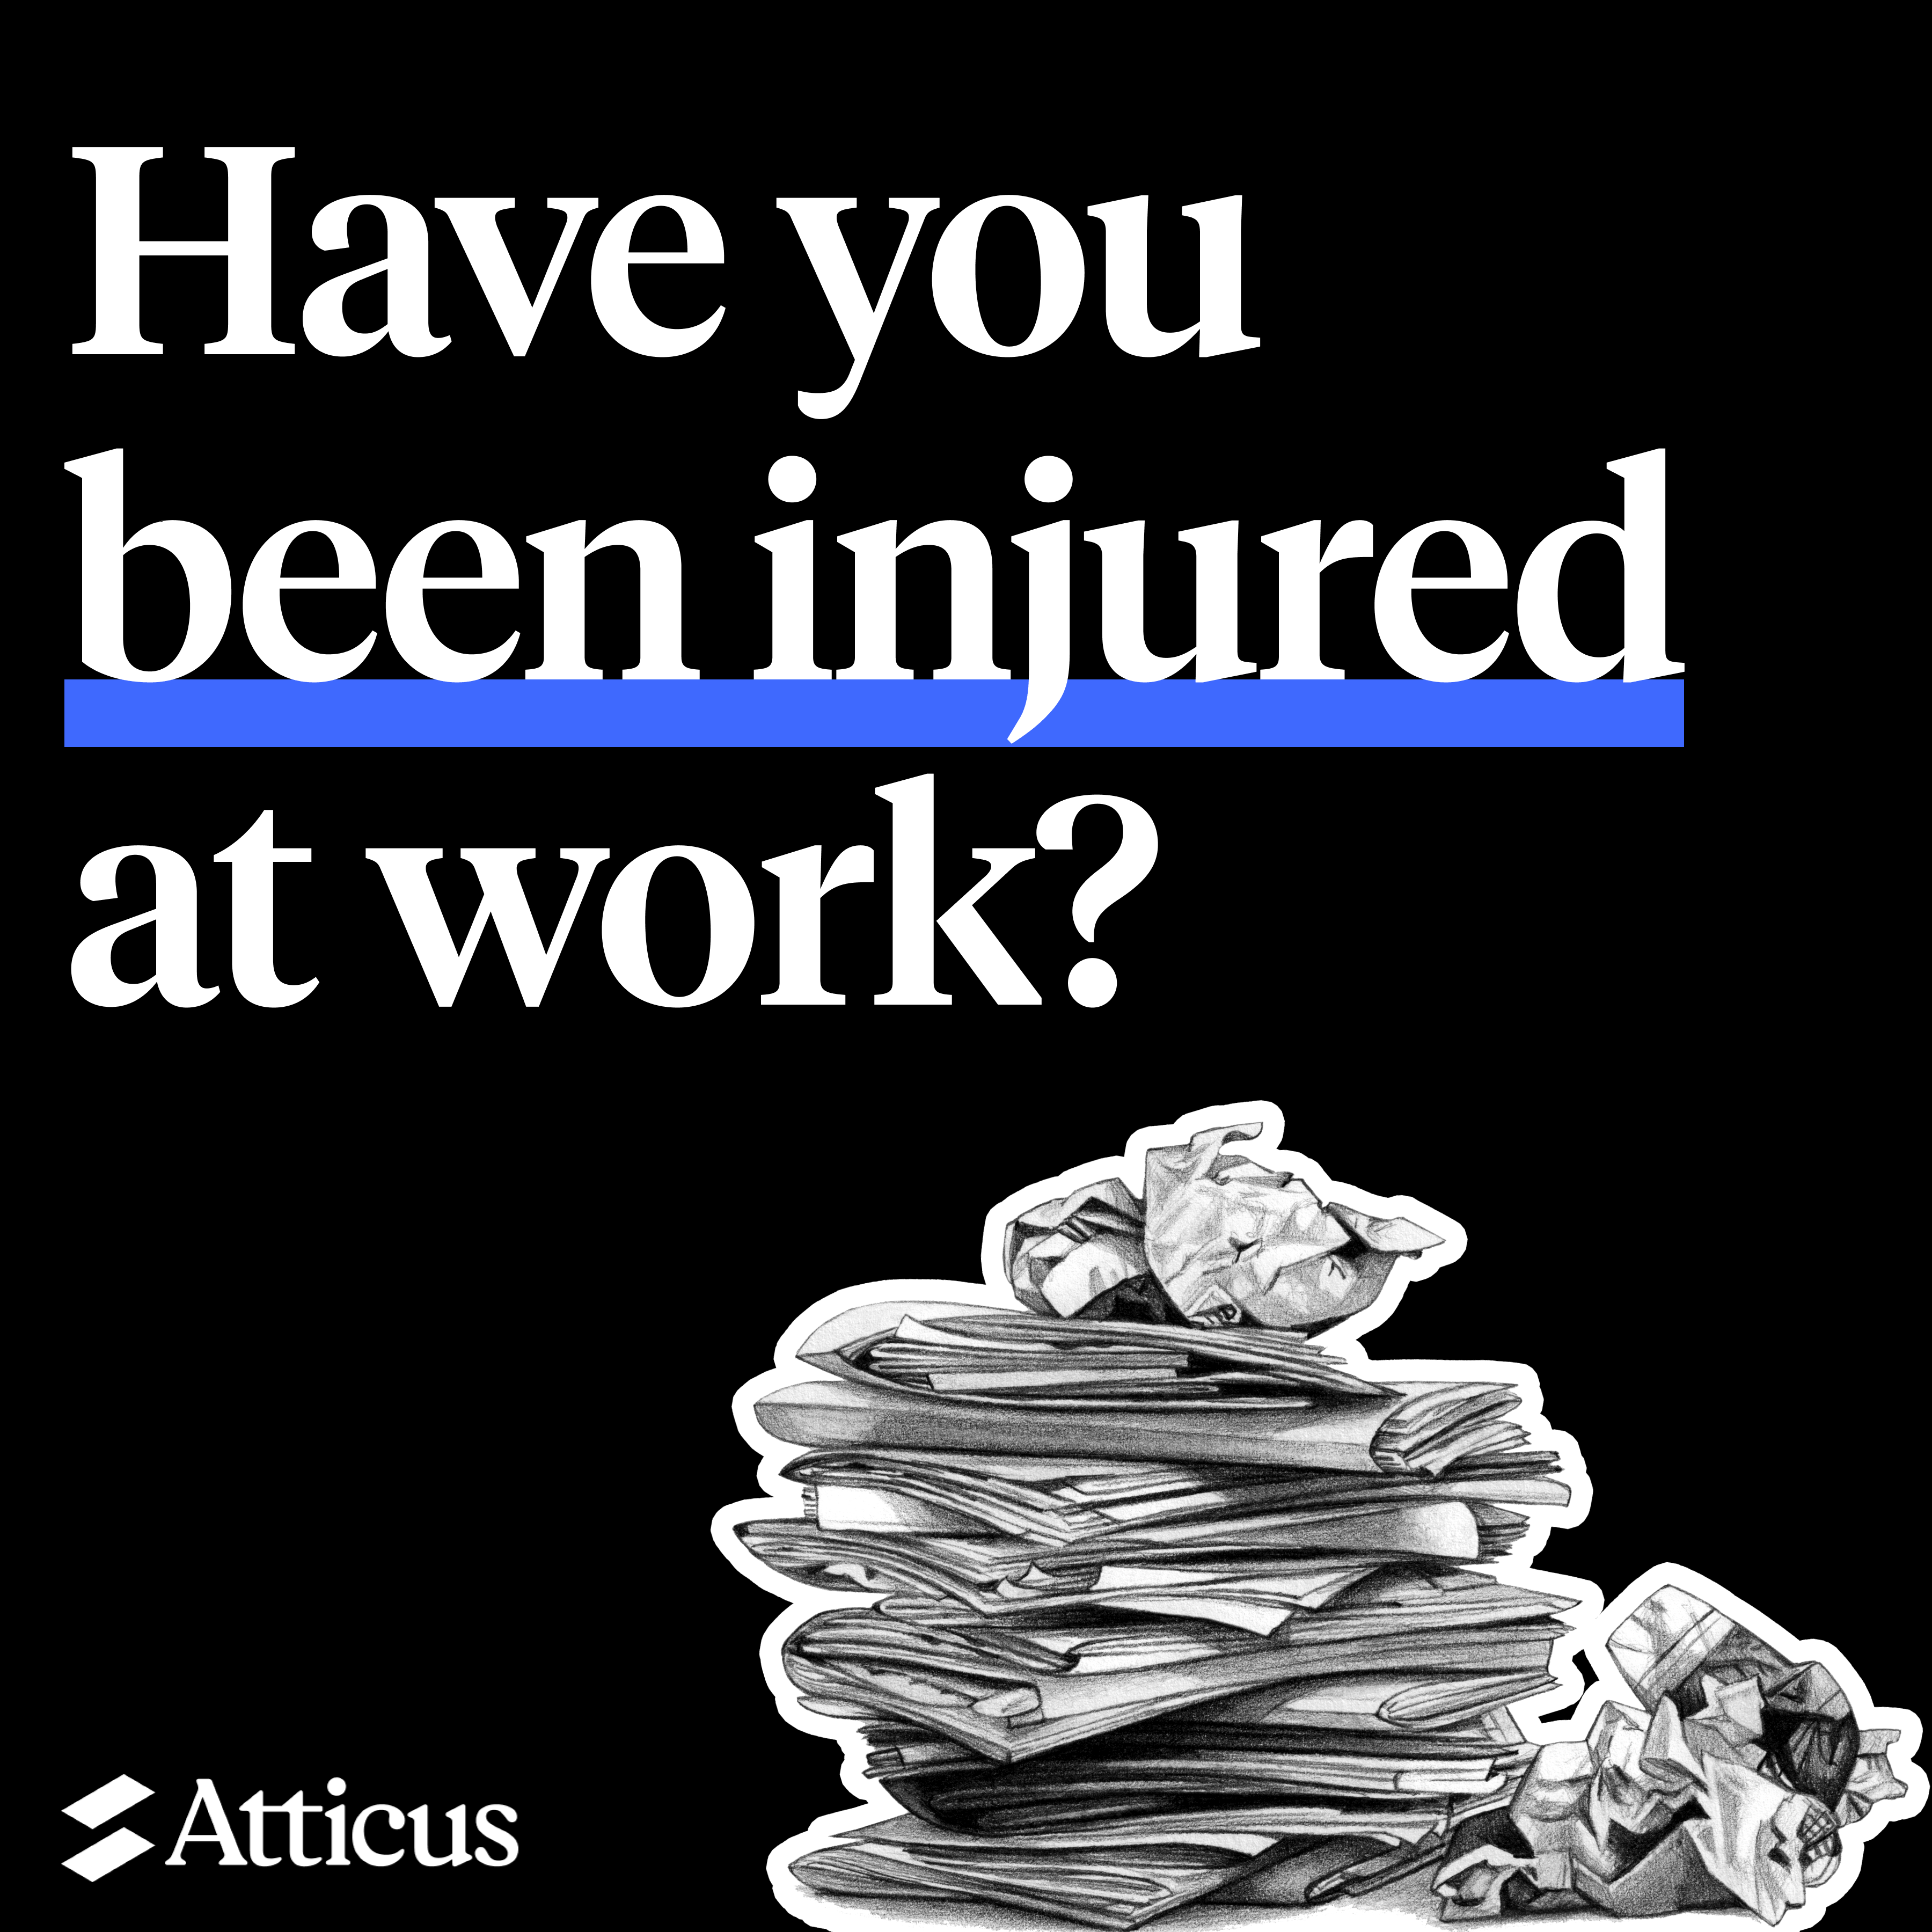 Atticus can help if you've been injured at work.